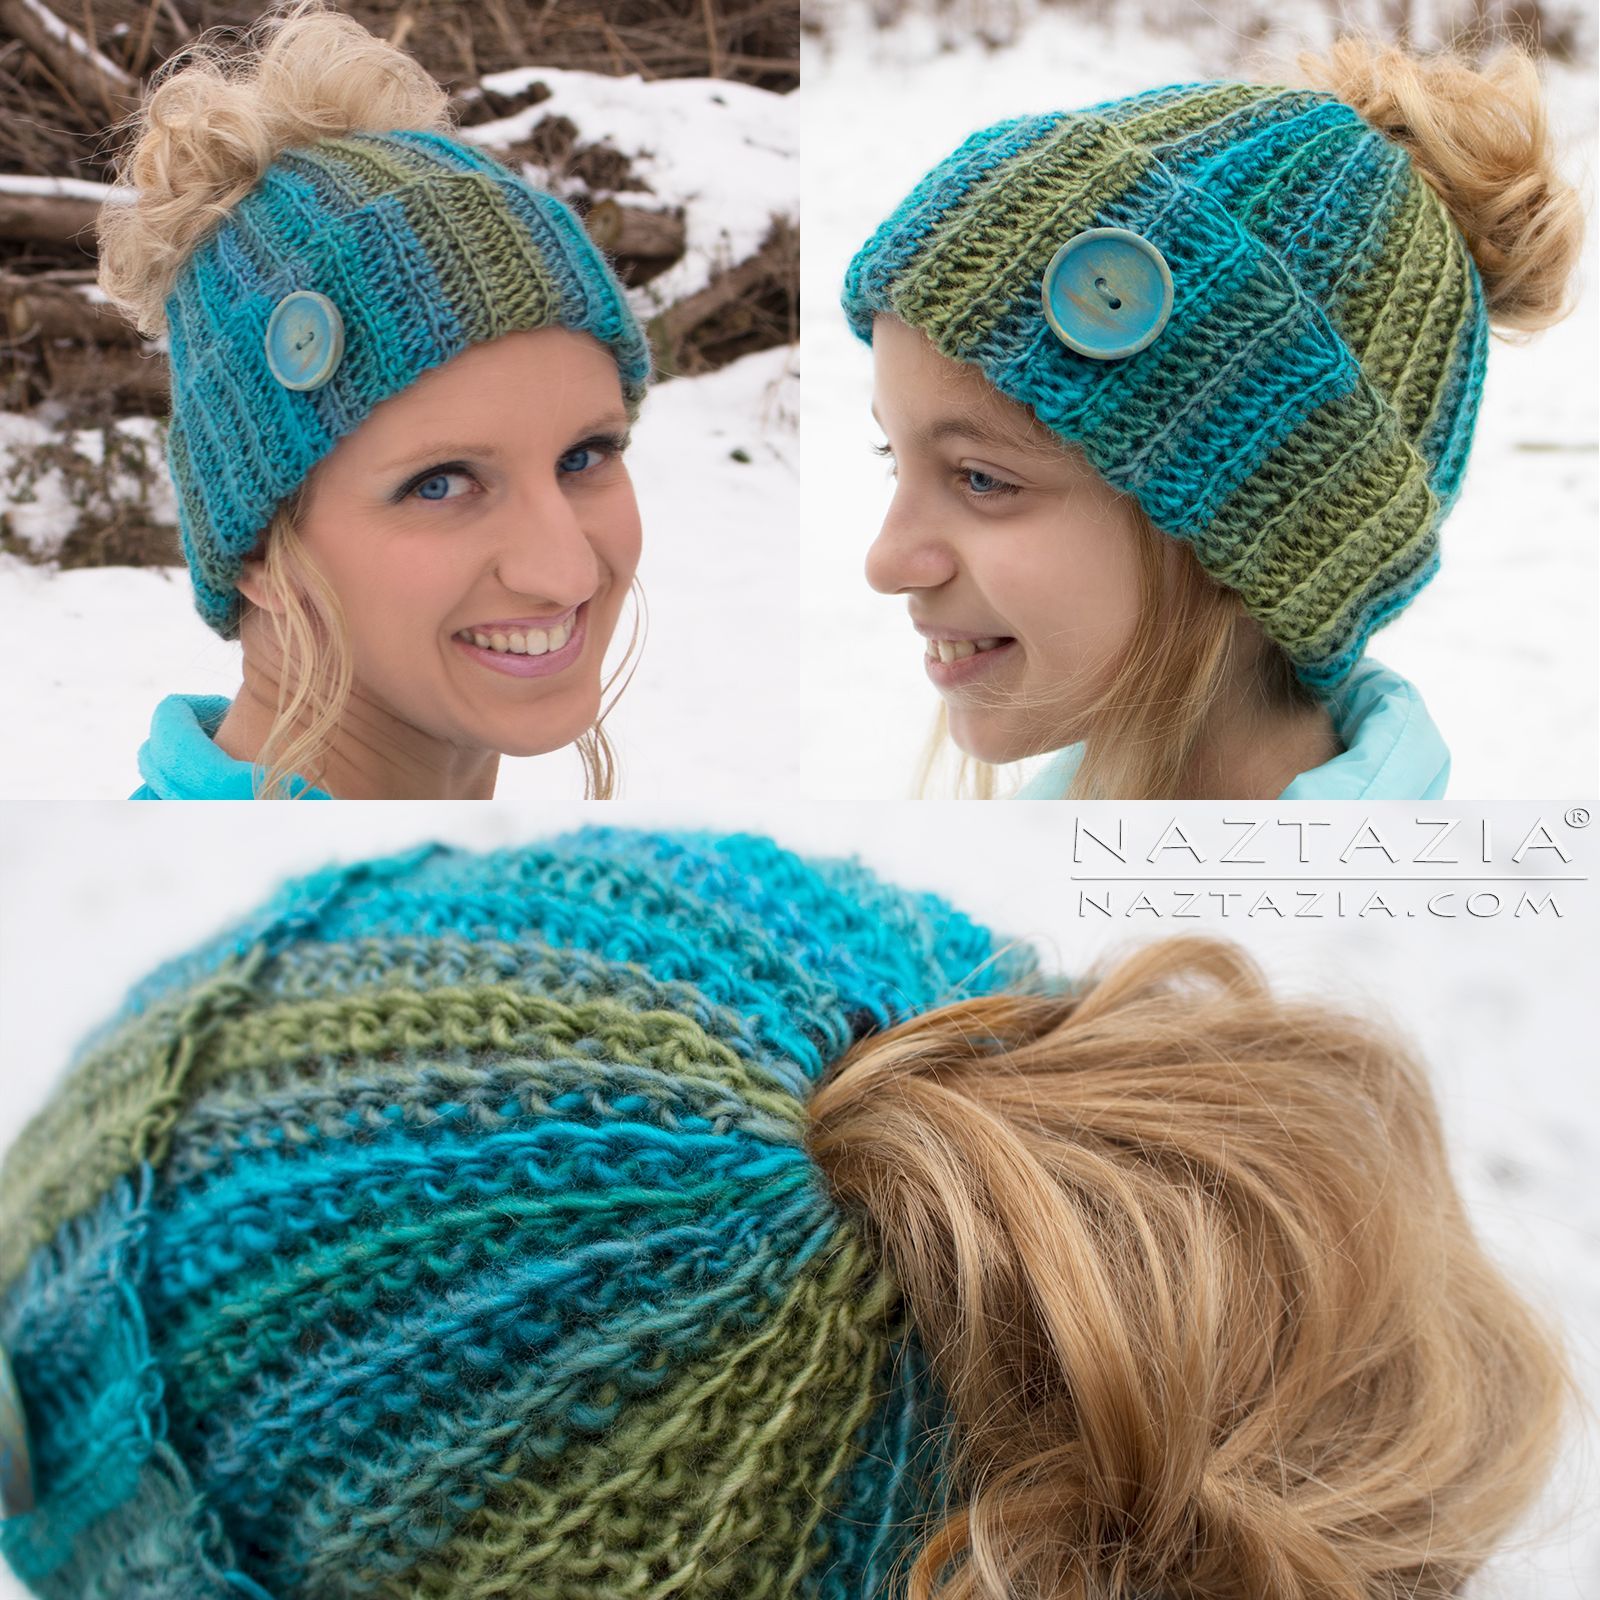 DIY Free Pattern and YouTube Tutorial Video for Crochet Ribbed Bun Hat – Messy Bun Hat – by Donna Wolfe from Naztazia